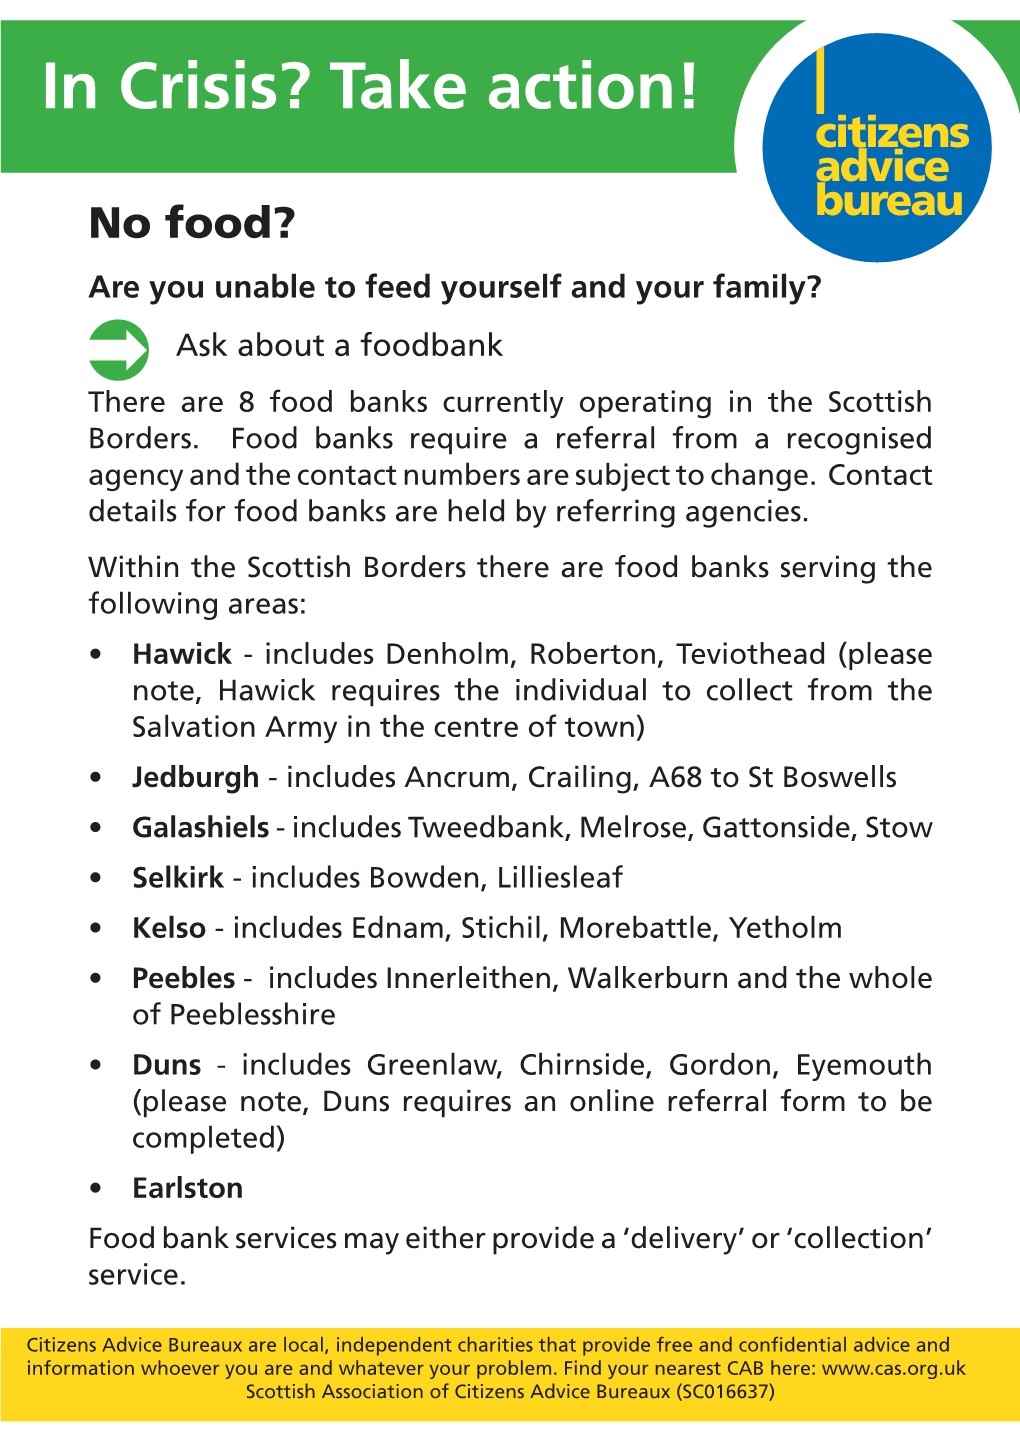 In Crisis? Take Action! Foodbanks